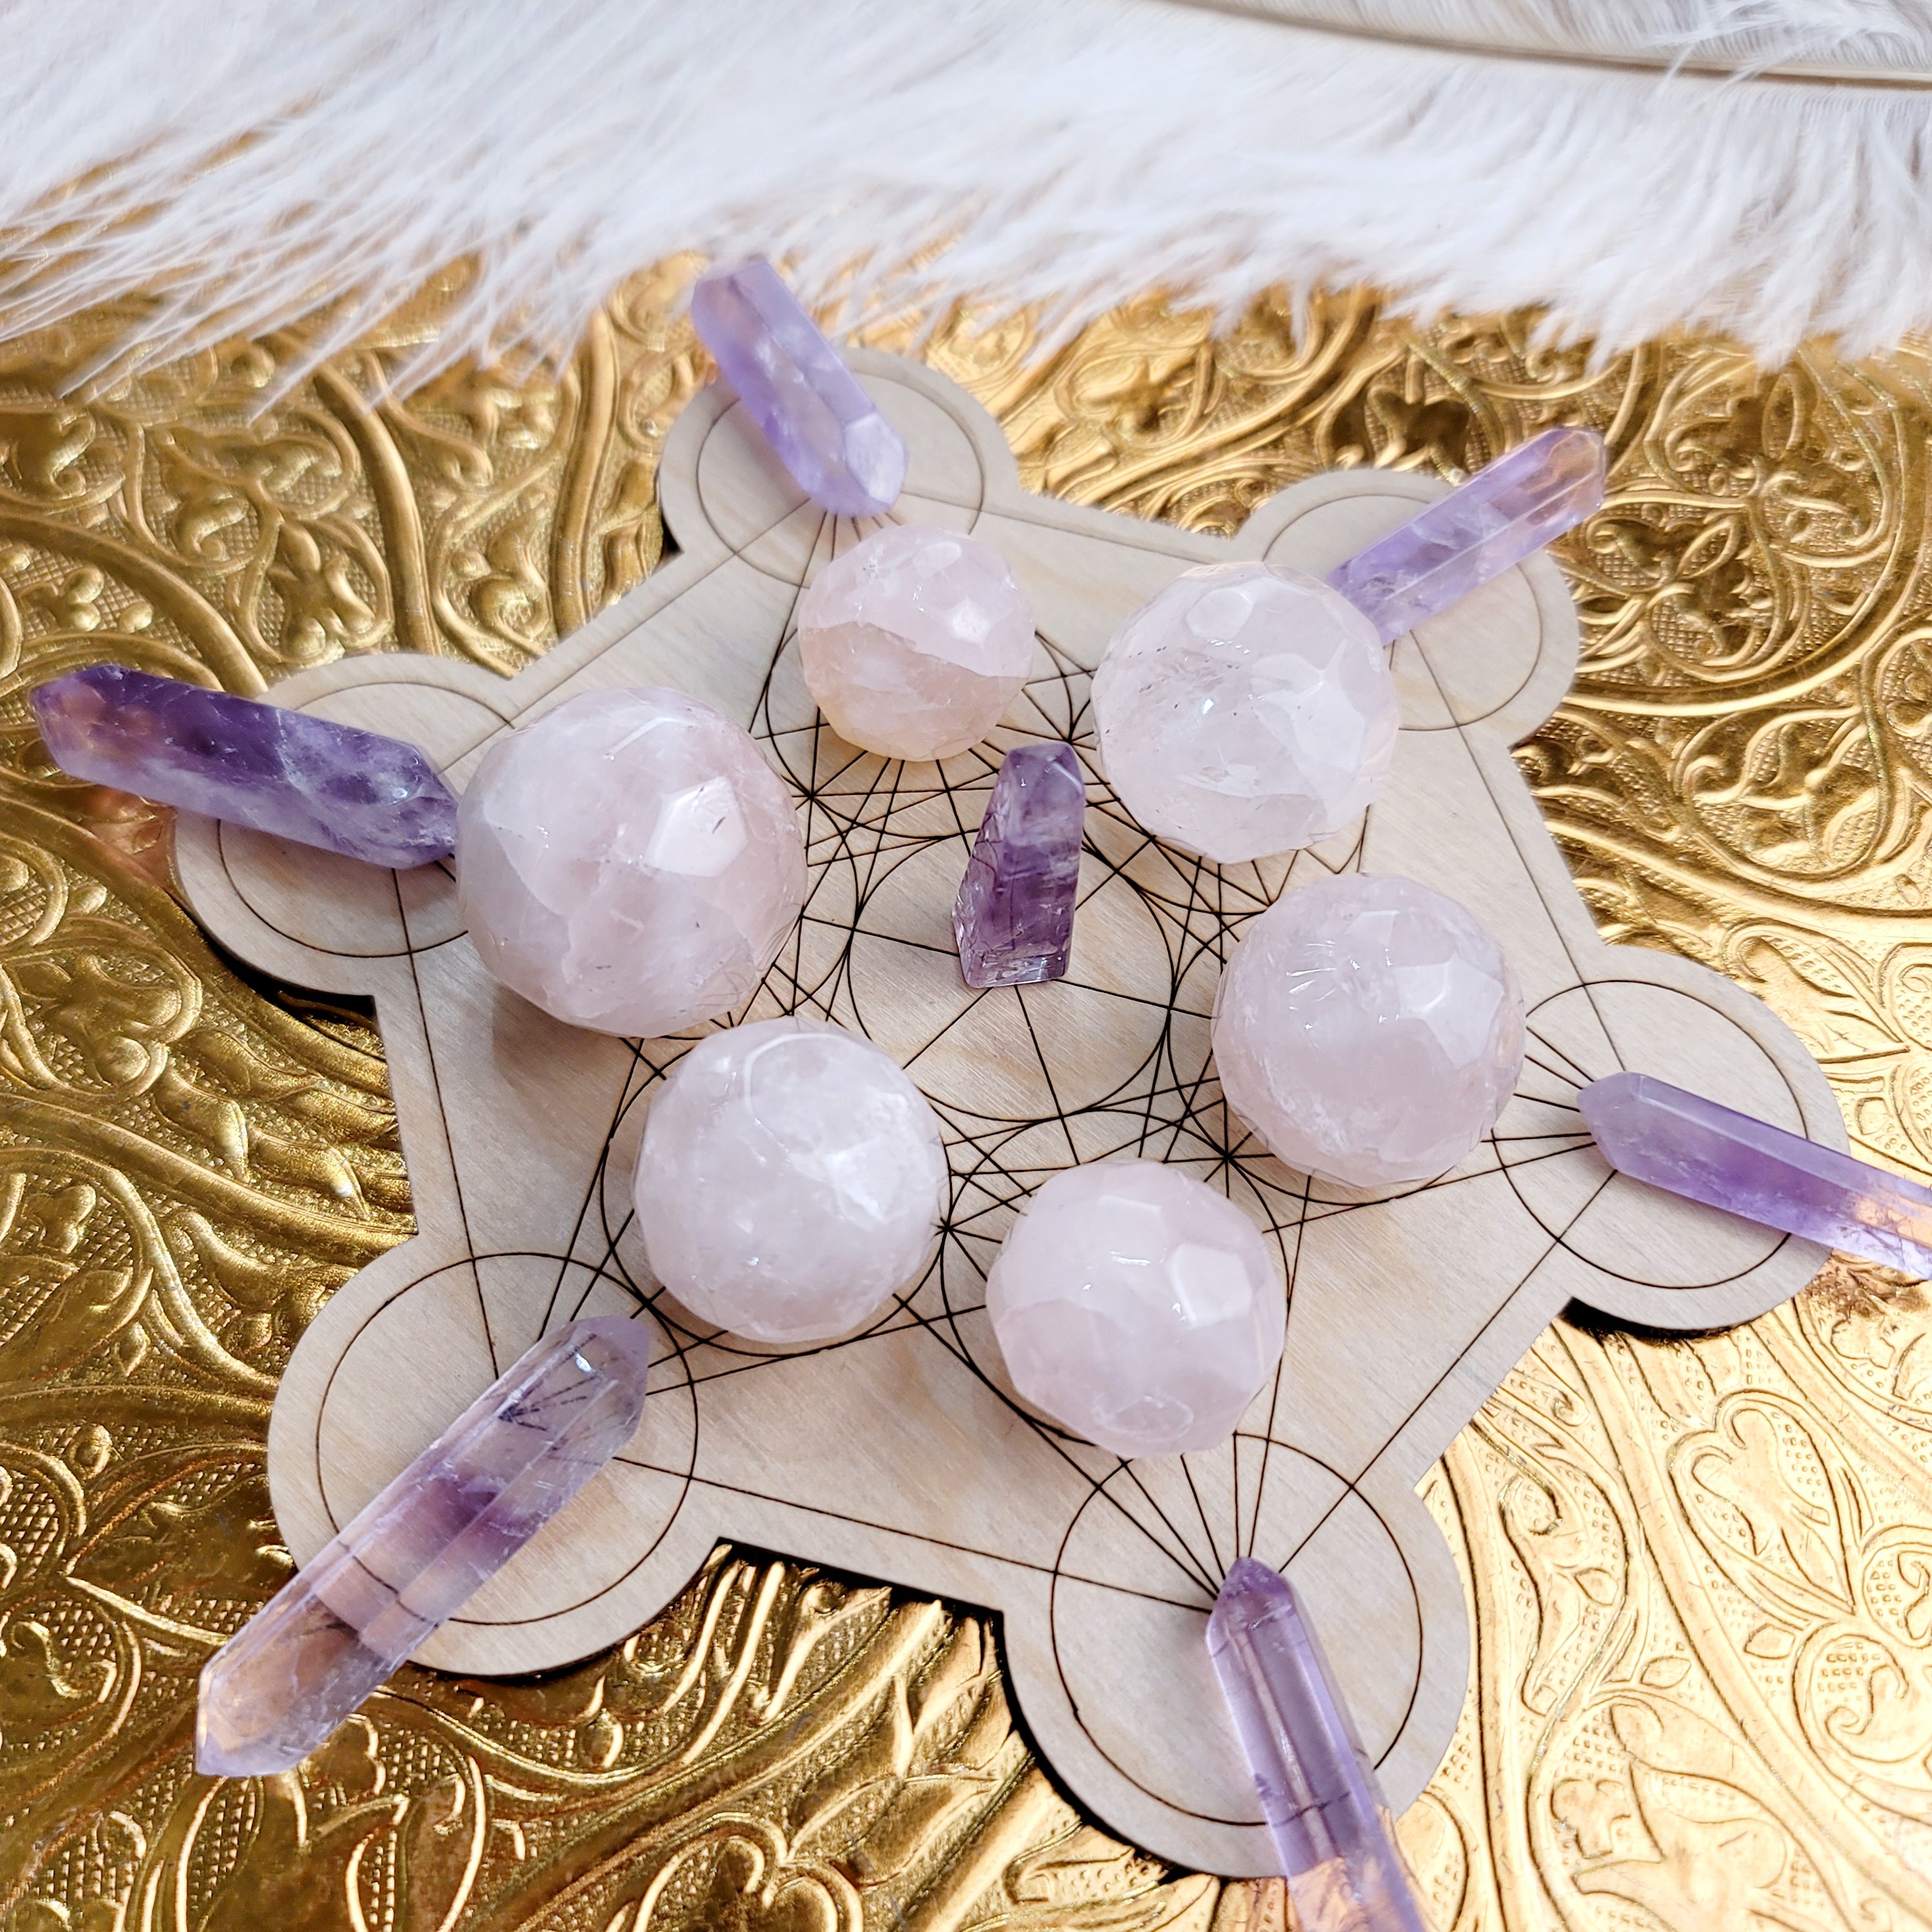 Self Love Goddess Crystal Grid Set with Rose Quartz and Amethyst for Cleansing Your Aura, Goddess Vitality Energy and Self Love Worship